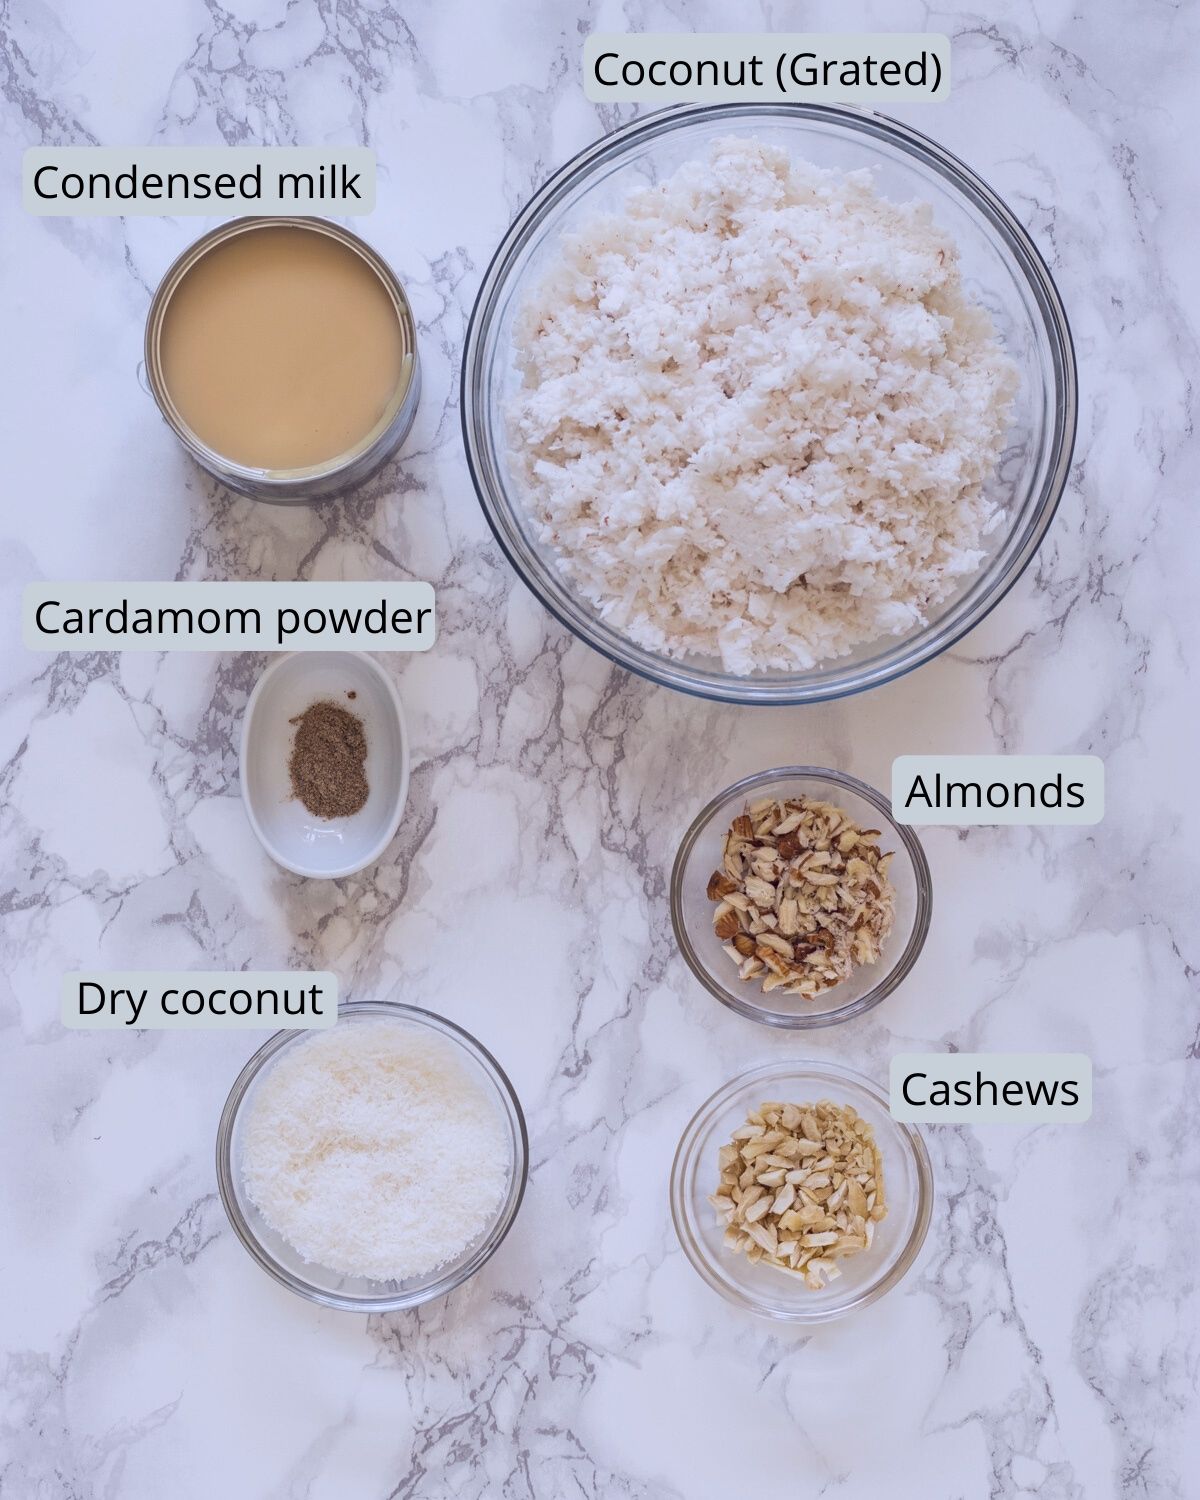 image of ingredients used for coconut ladoo. Includes coconut, condensed milk, cardamom, nuts, dry coconut.